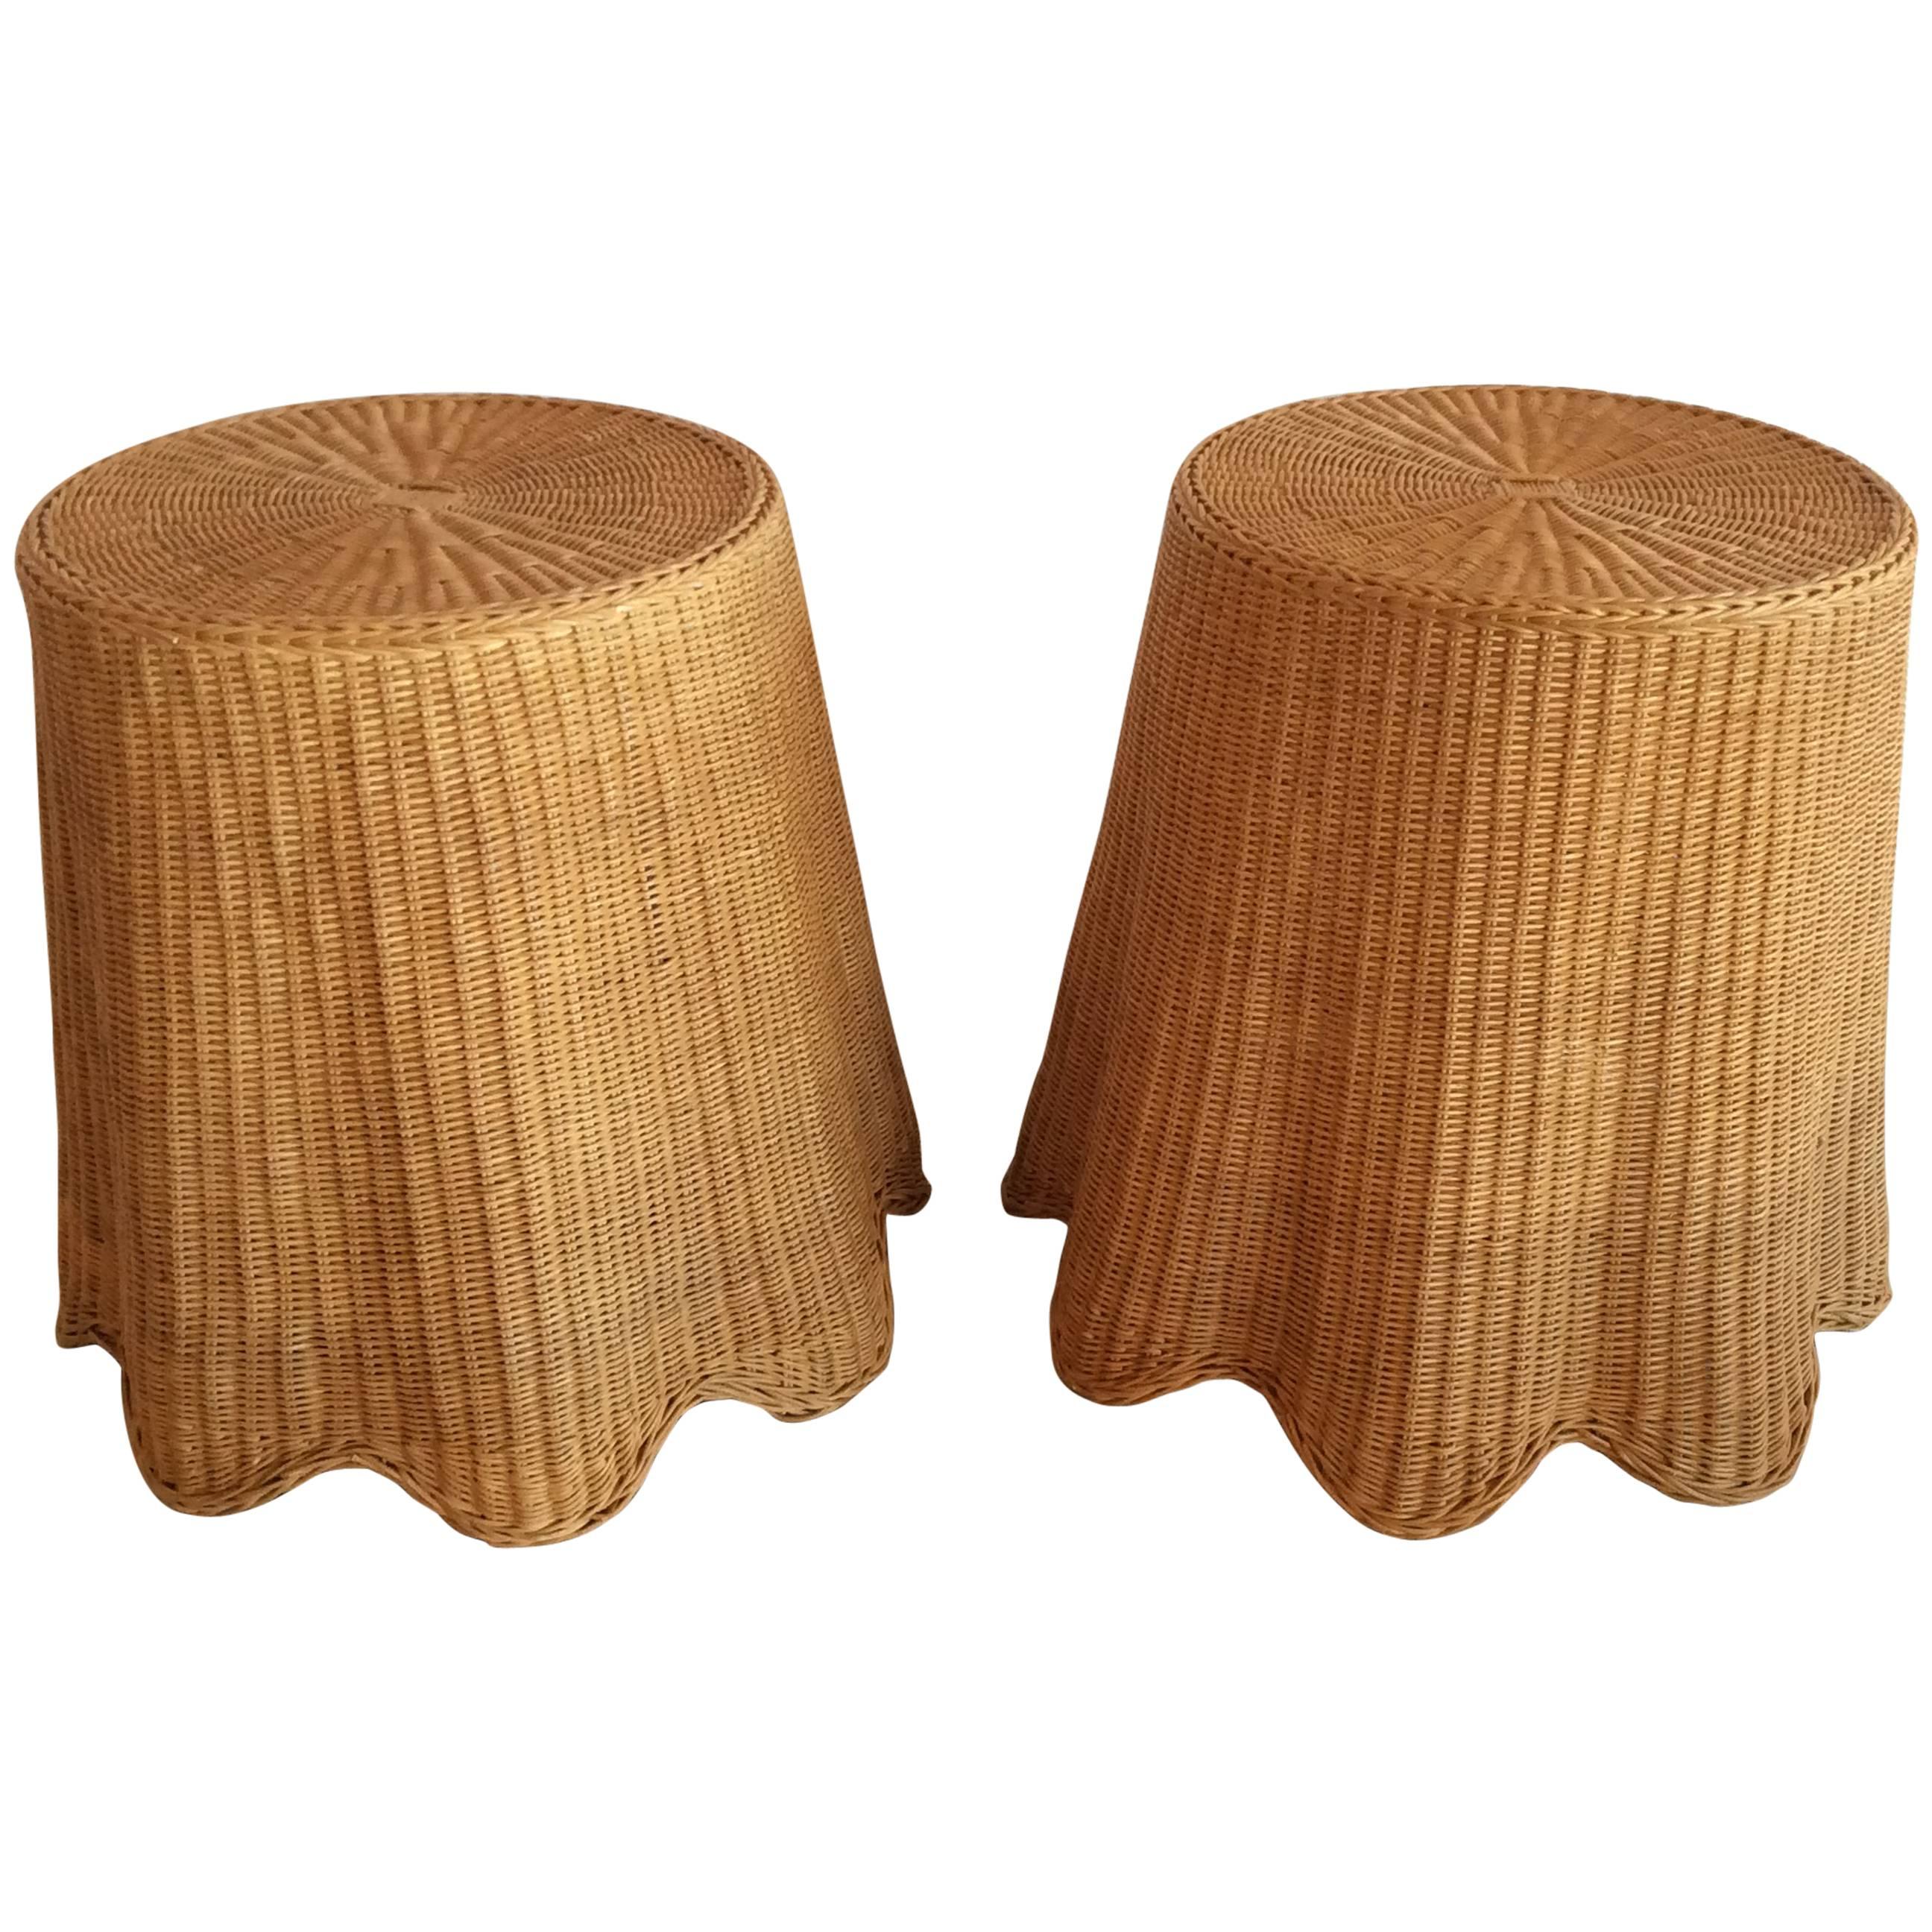 Vintage Pair of Wicker Rattan Drapped Drape End Side Tables Palm Beach Tropical